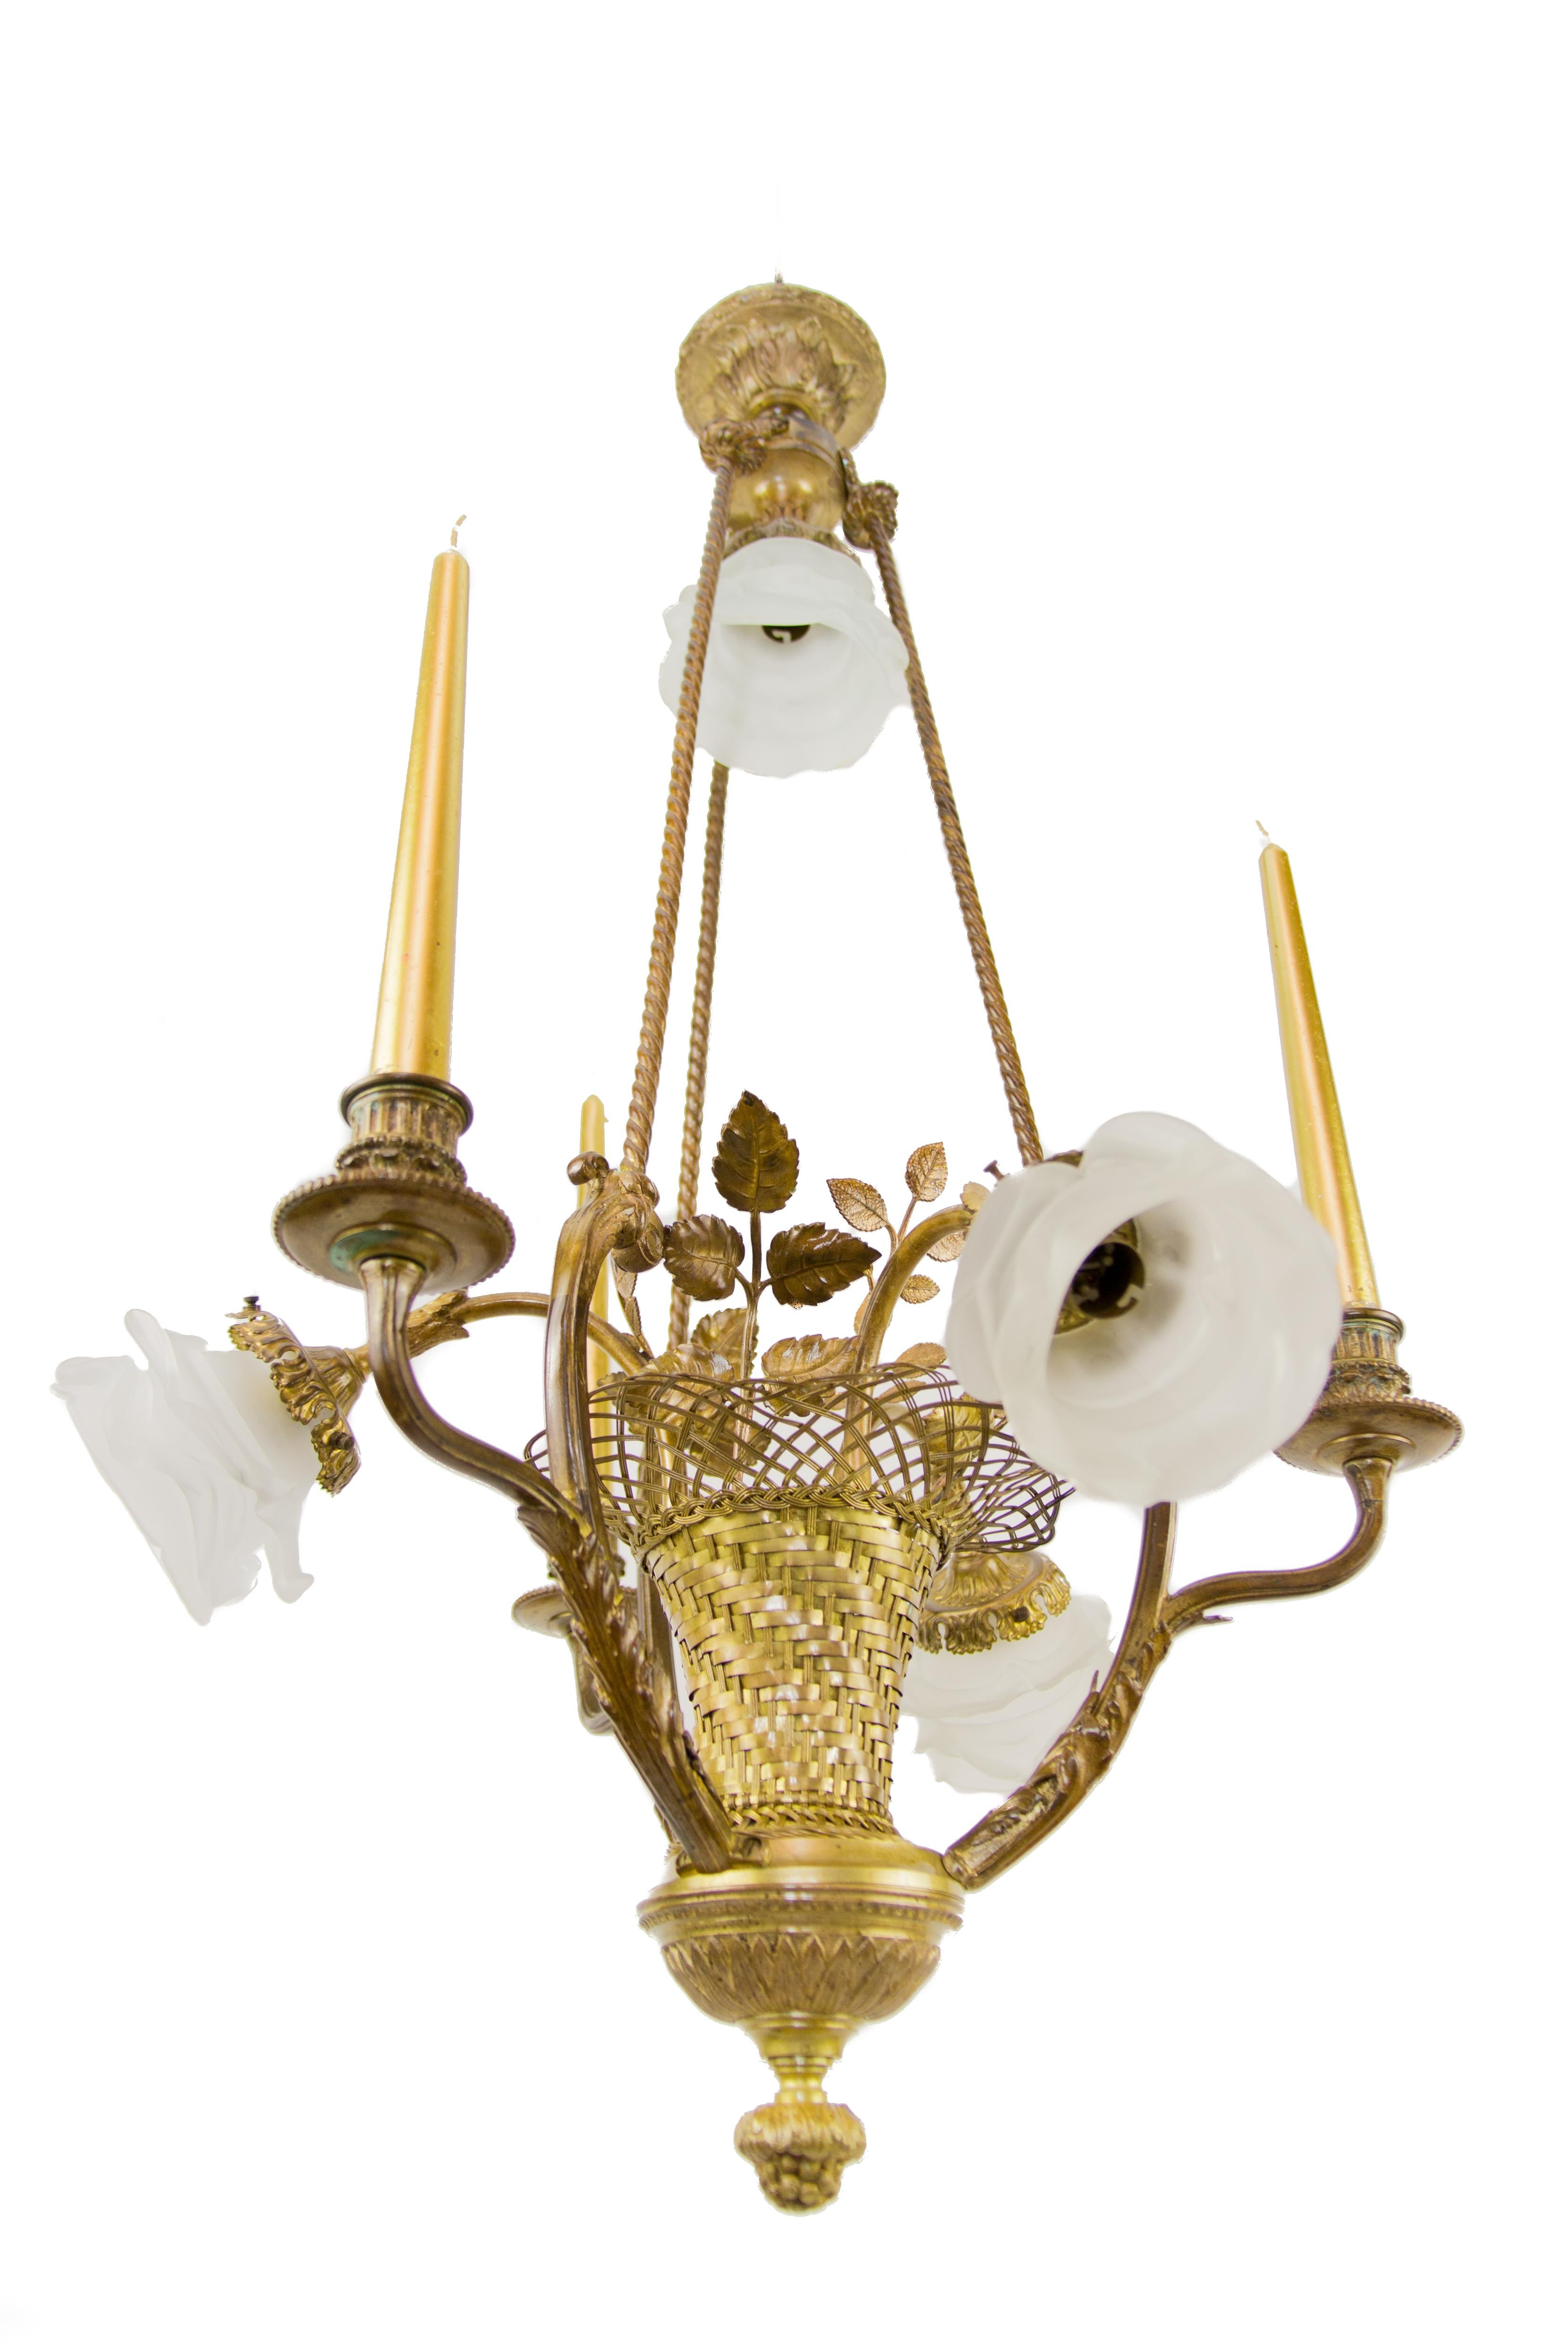 French Belle Epoque bronze woven basket chandelier. Three arms are candle holders, three arms and one light on top have B22 sockets with new wiring, frosted glass flower shaped shades.
Measures: Total height is 33.4 inches / 85 cm; diameter 19.7